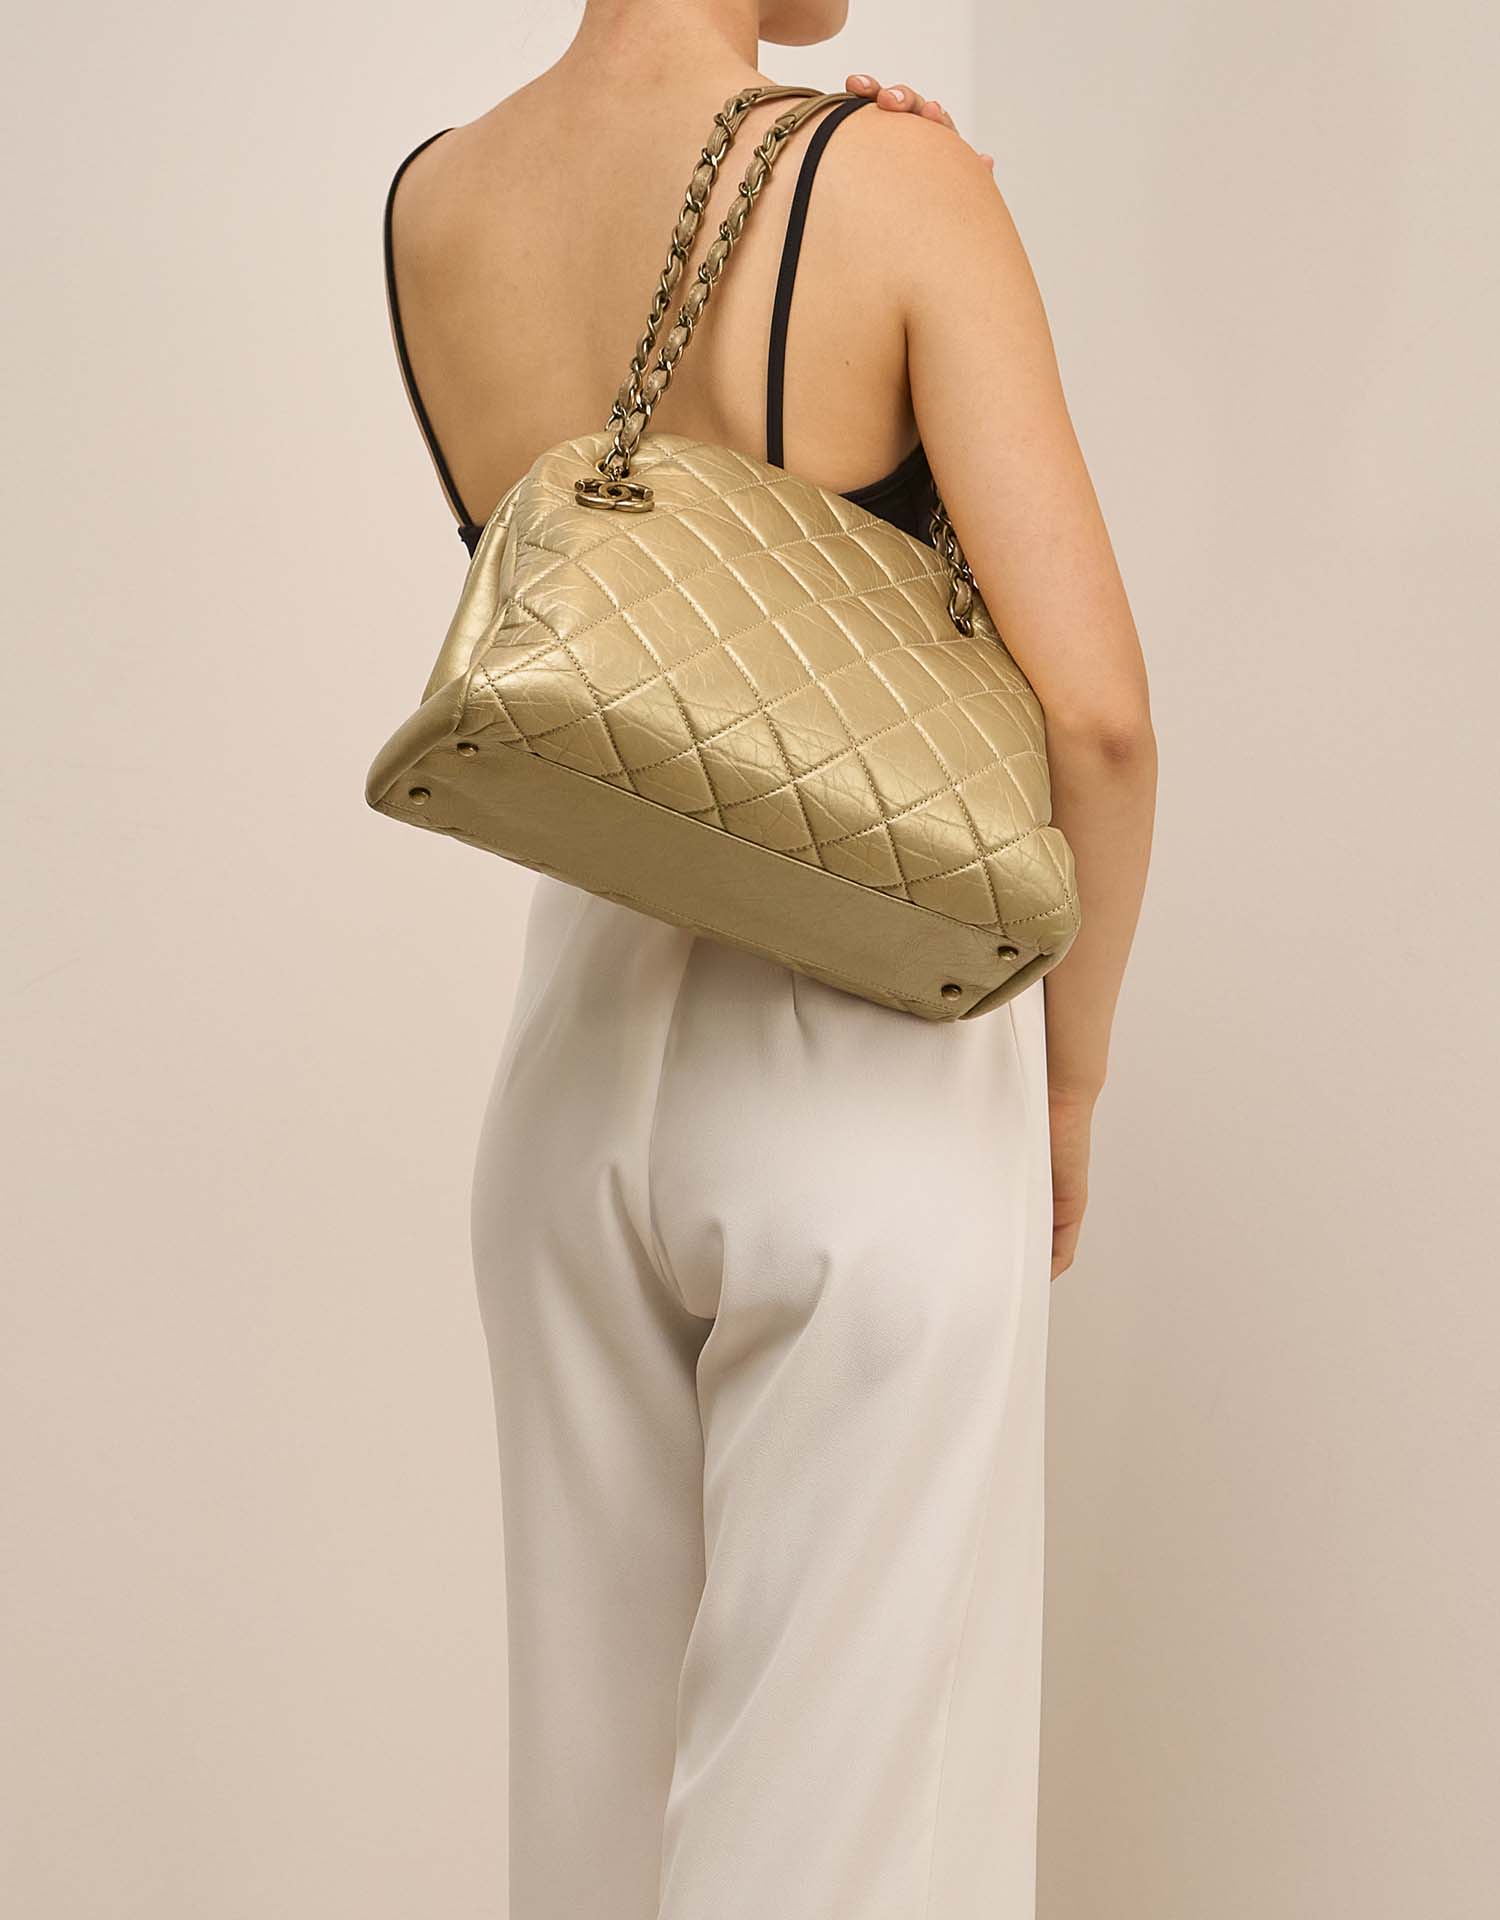 Chanel BowlingMademoiselle Large Gold on Model | Sell your designer bag on Saclab.com